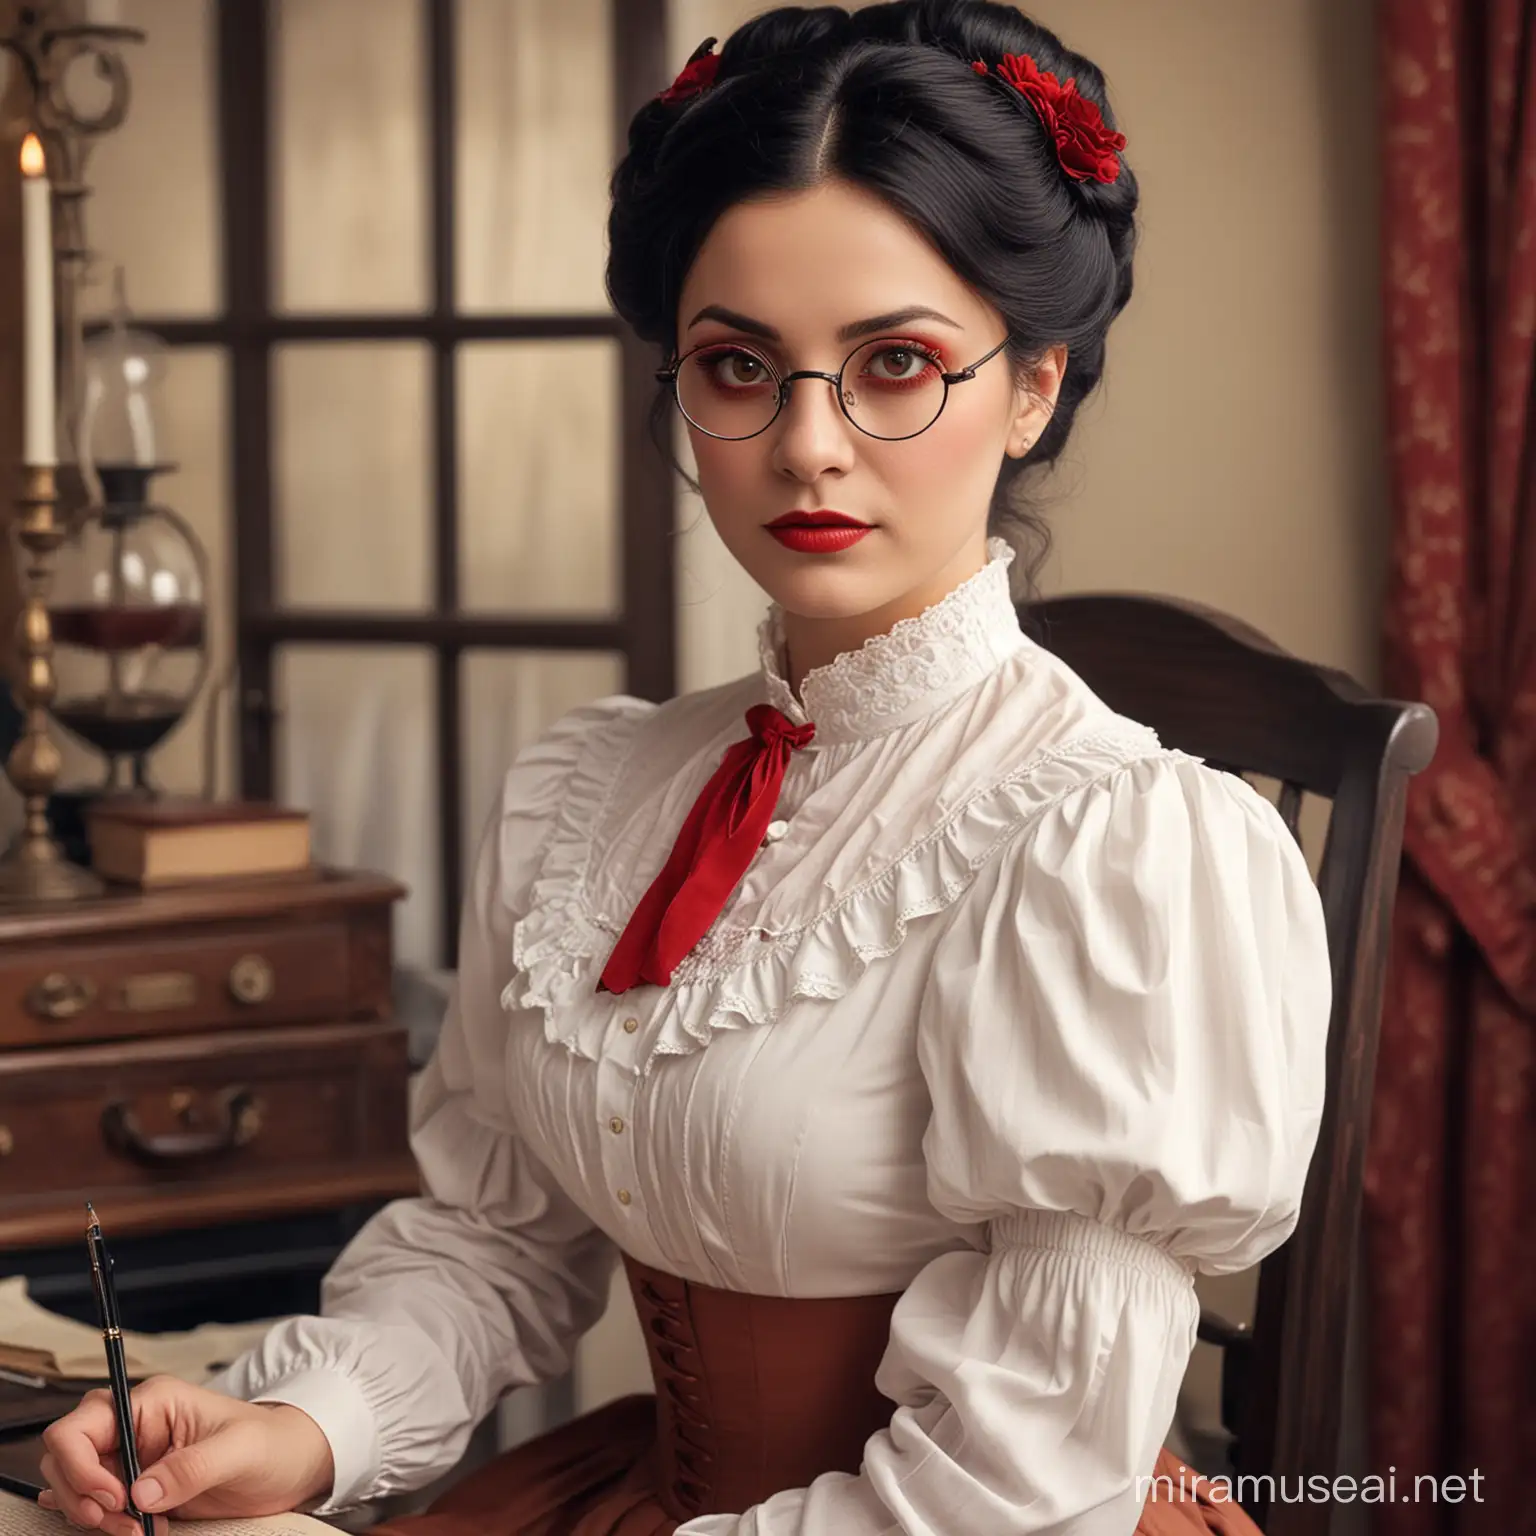 Victorian Lady, black hair in a typical victorian updo, red eyes, half-moon spectacles, white Victorian blouse, brown skirt, doctor.
